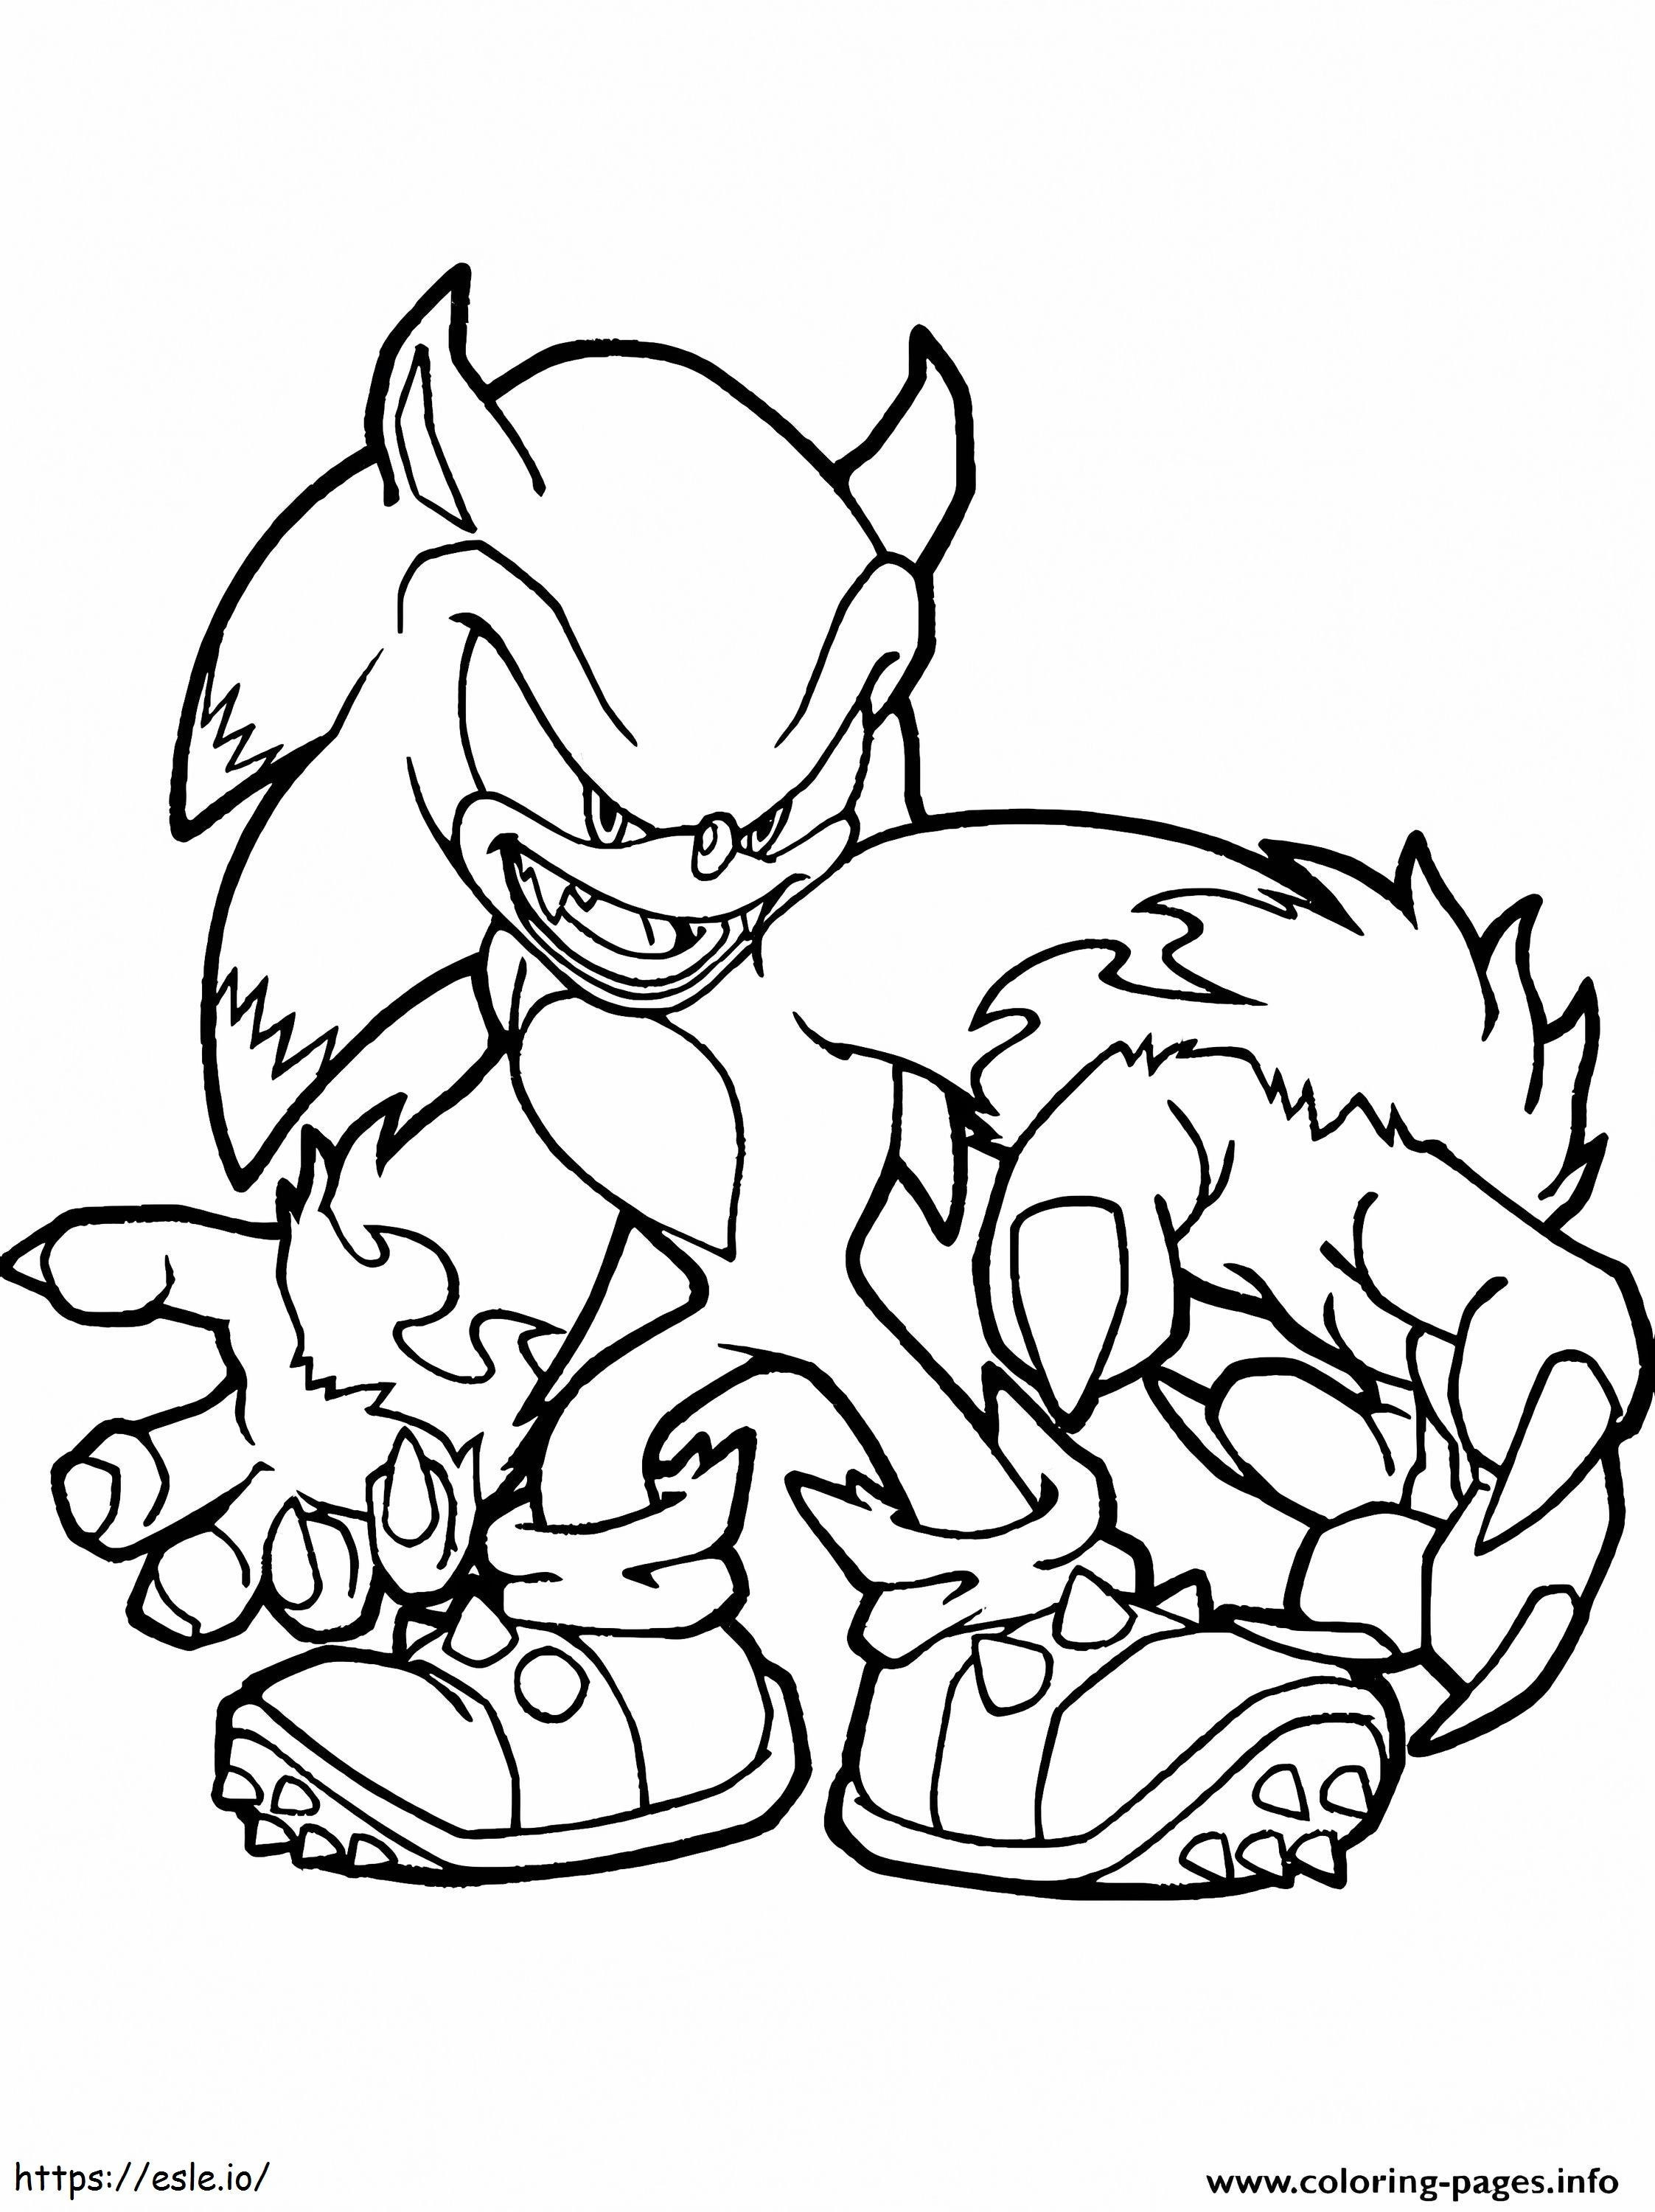 1545011619 1451499645Sonic The New Monster coloring page